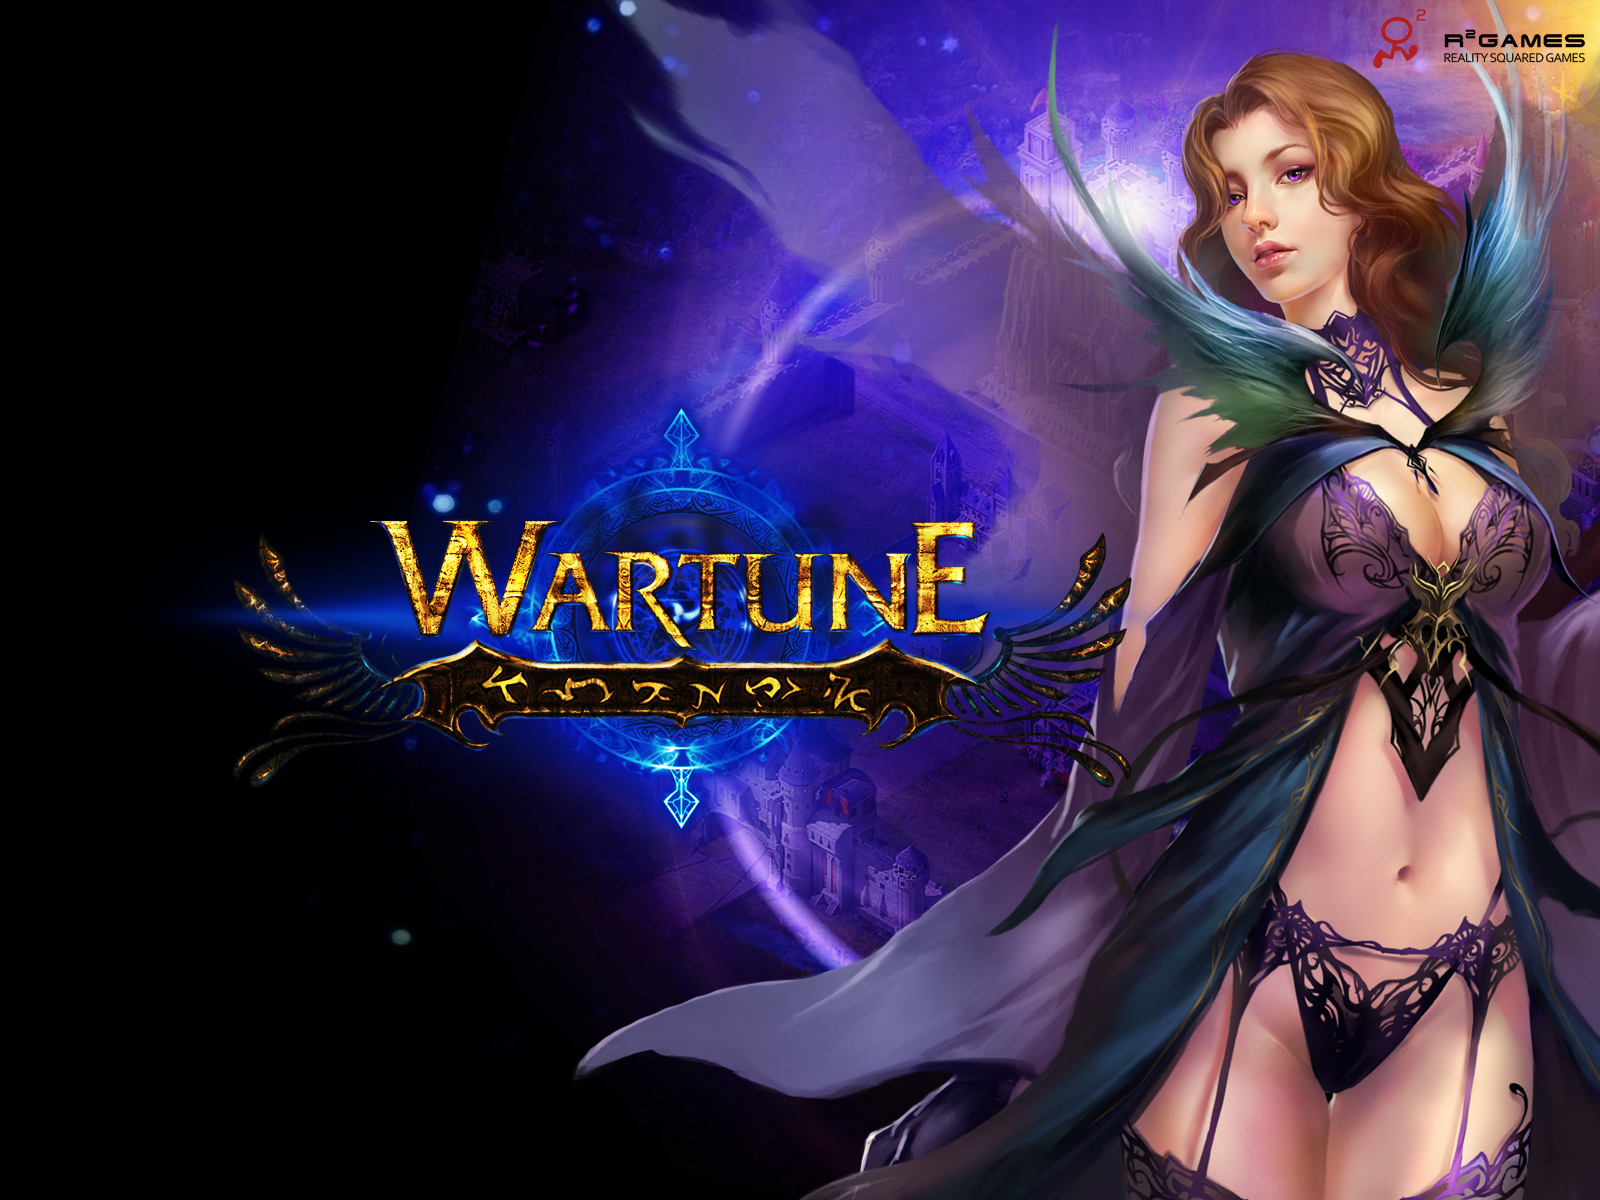 Amazing Wartune Pictures & Backgrounds